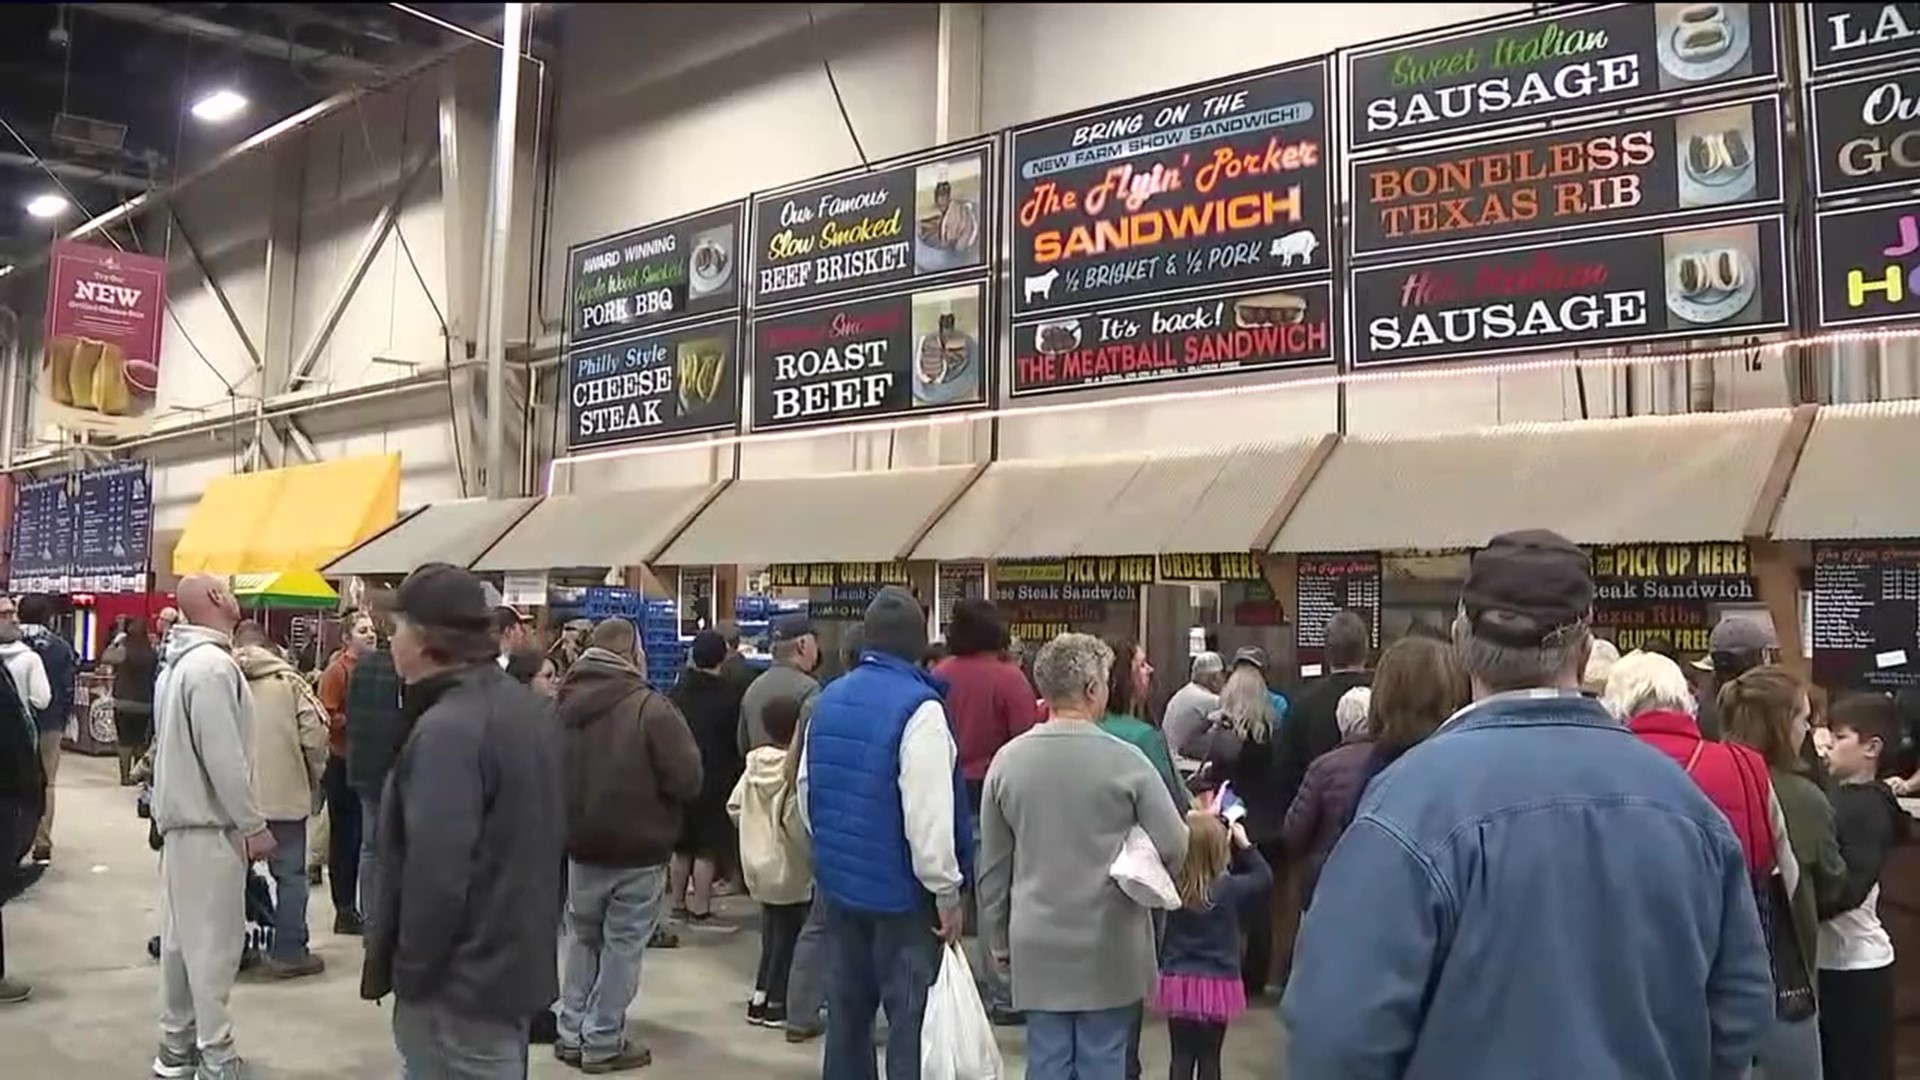 Later this week, the 2022 Pennsylvania Farm Show will kick off in person, indoors, despite rising COVID cases.